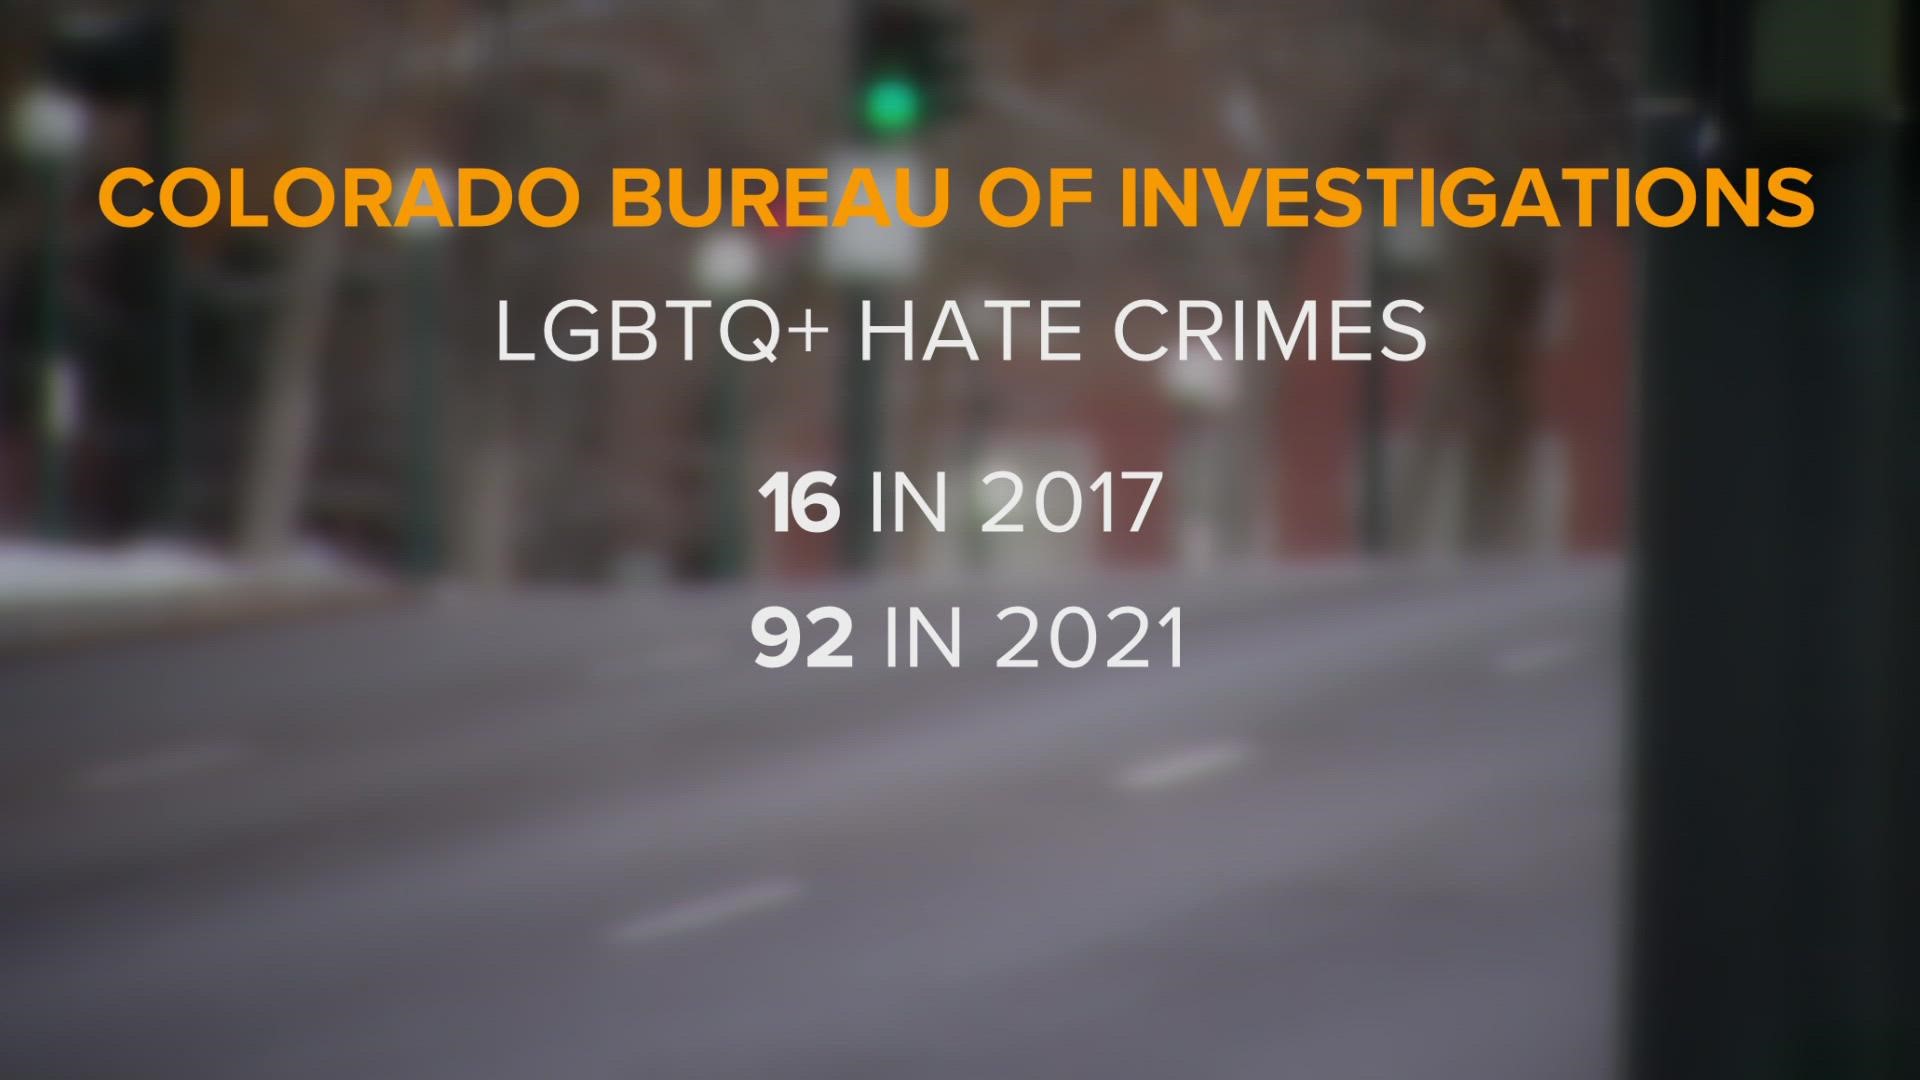 CBI data shows more people are being targeted for their sexual orientation and gender identity.